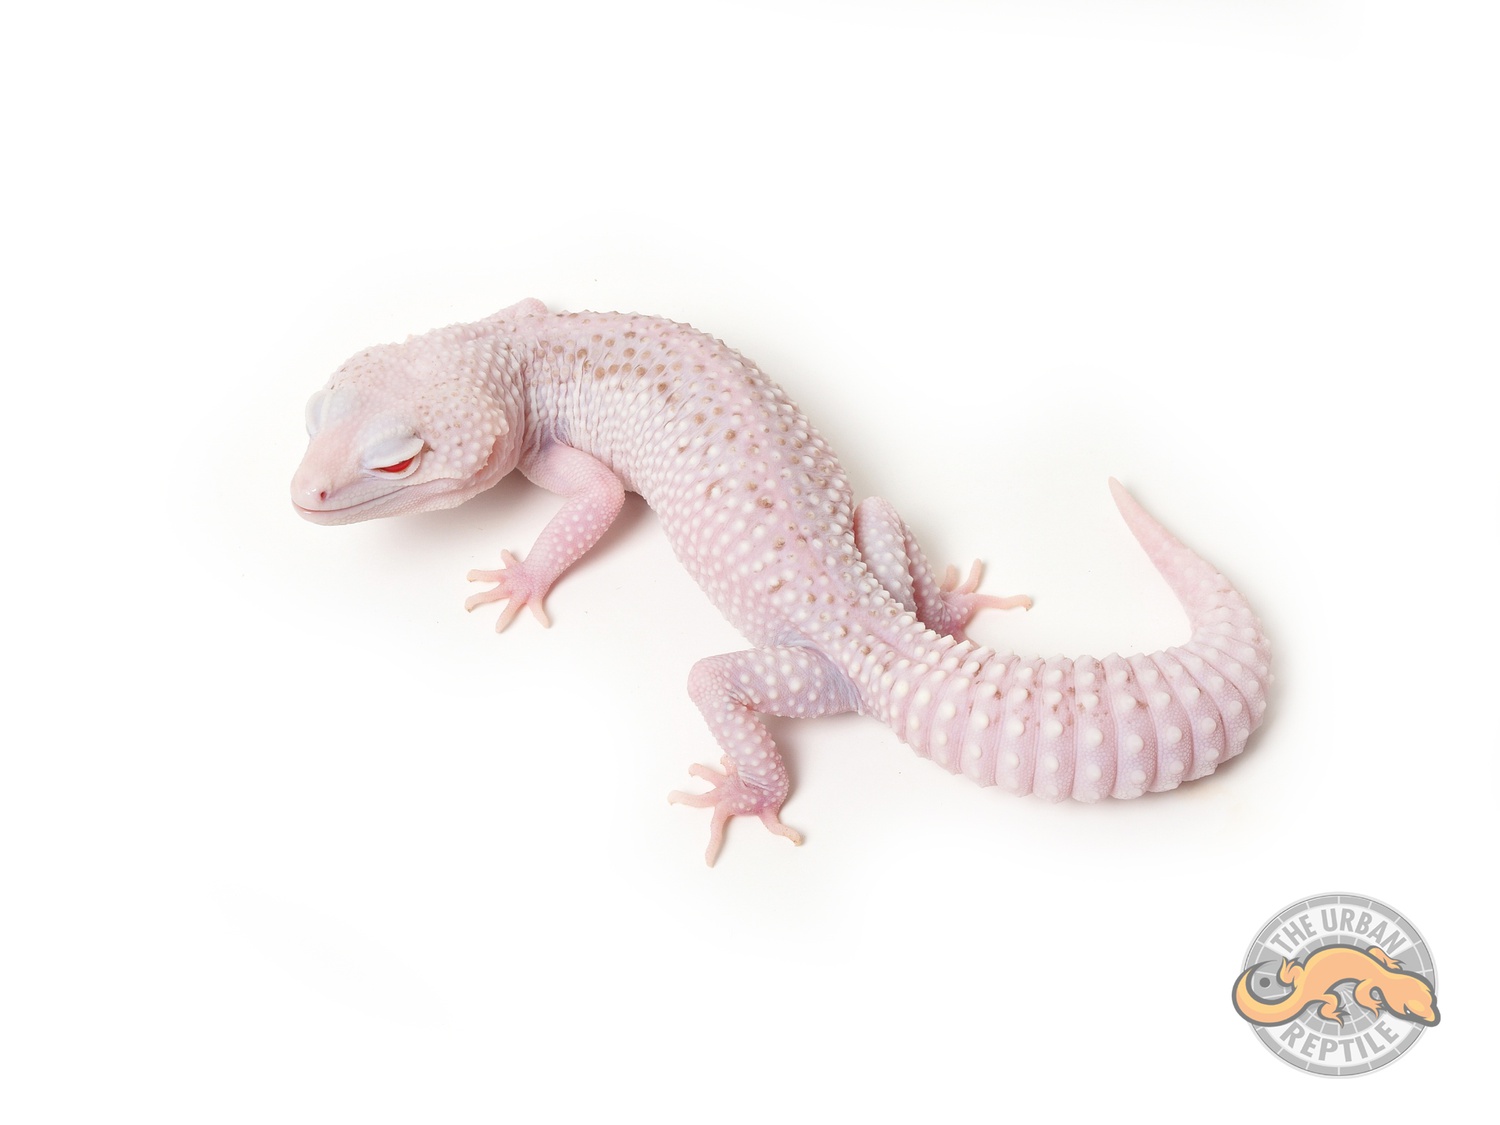 White & Yellow Snow Storm SONAR Leopard Gecko by The Urban Reptile